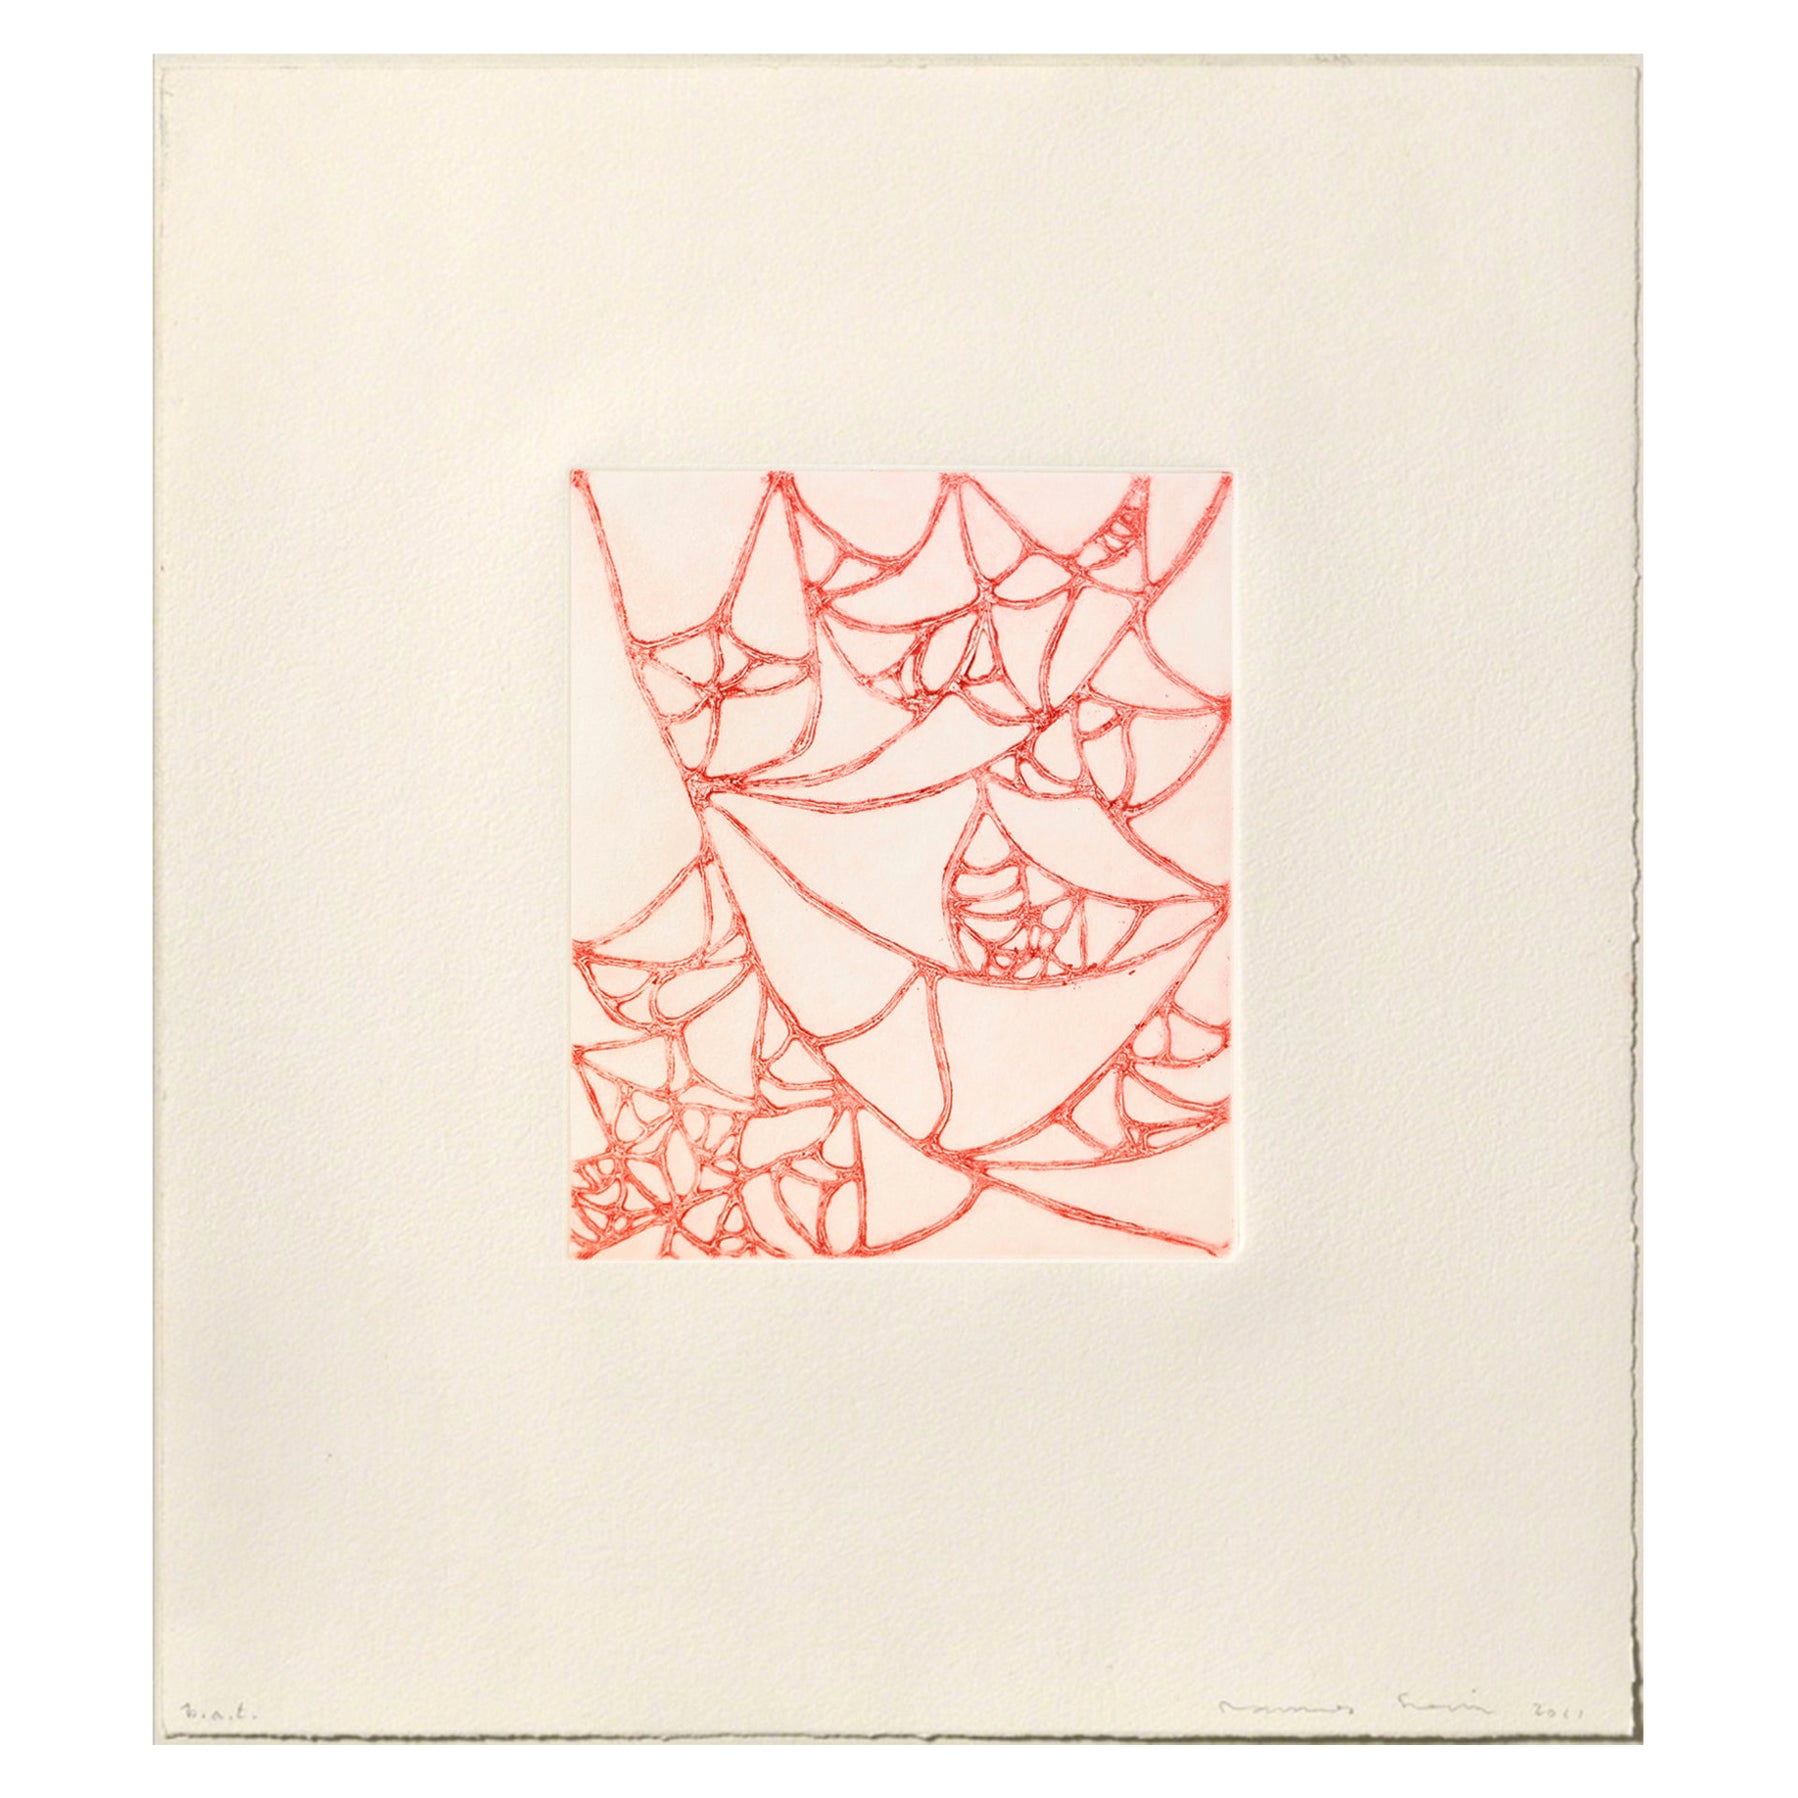 James Siena Etching 'Línies Pesades i Infectades', 2011 For Sale